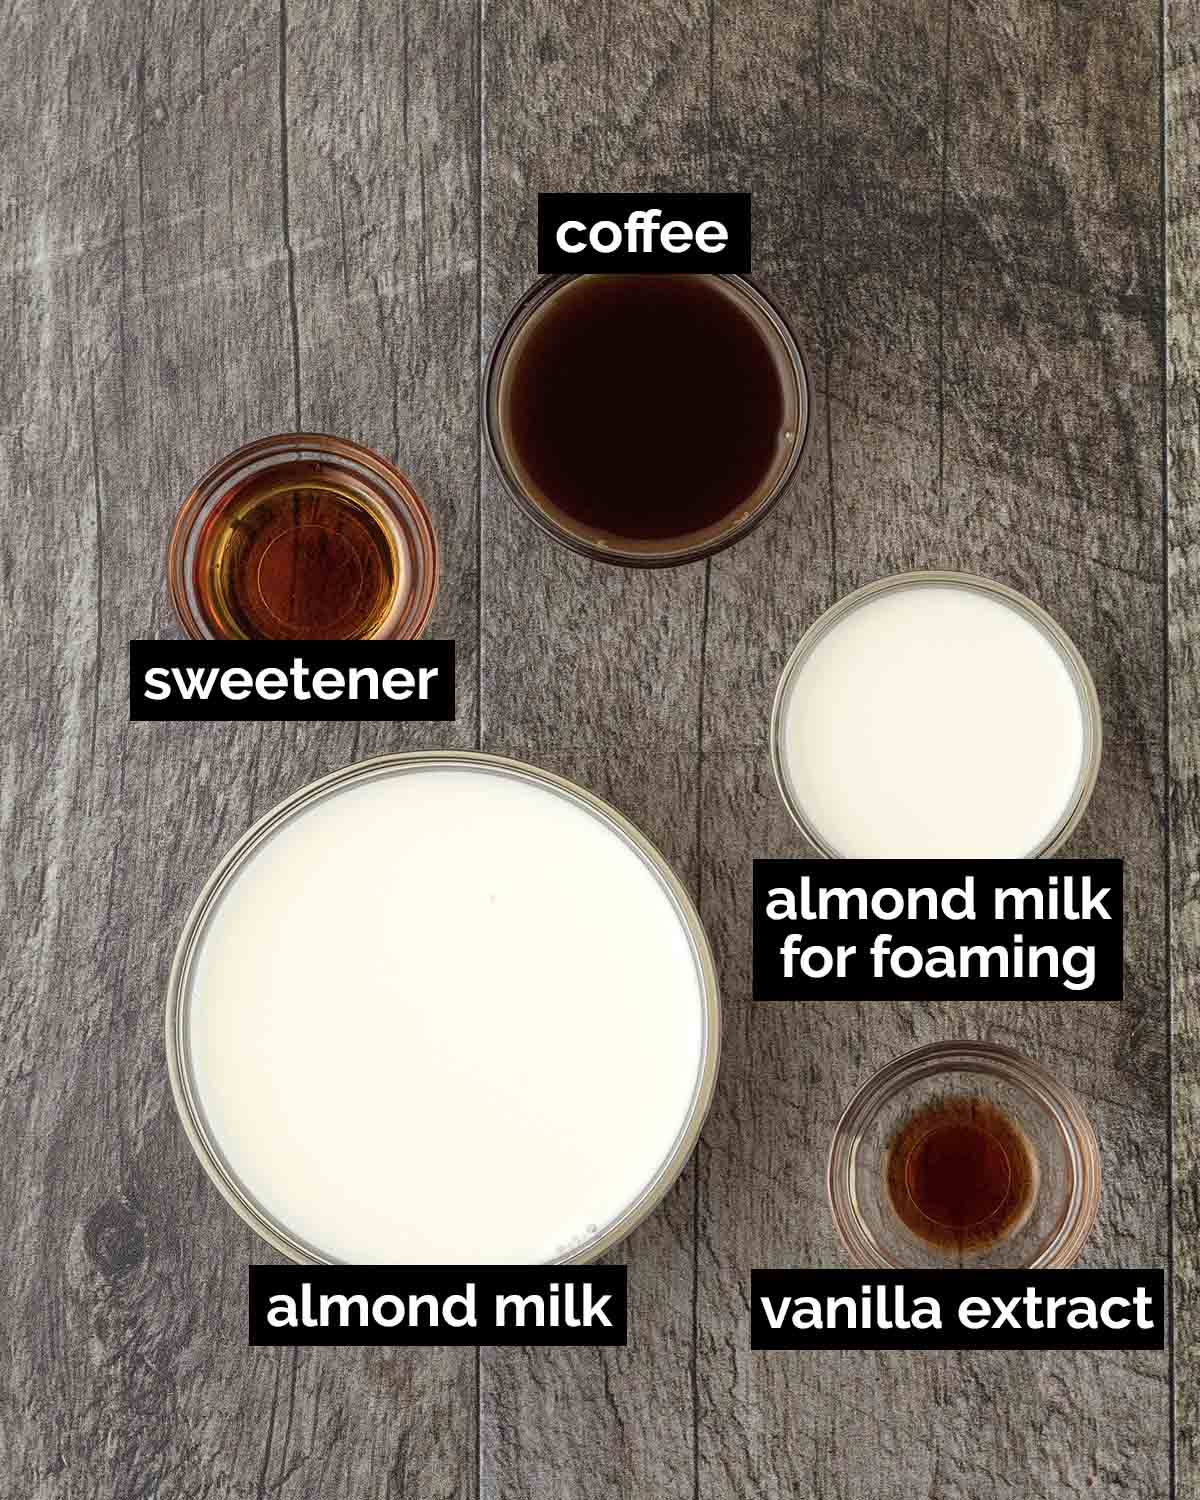 An overhead shot showing the ingredients needed to make an almond milk latte.